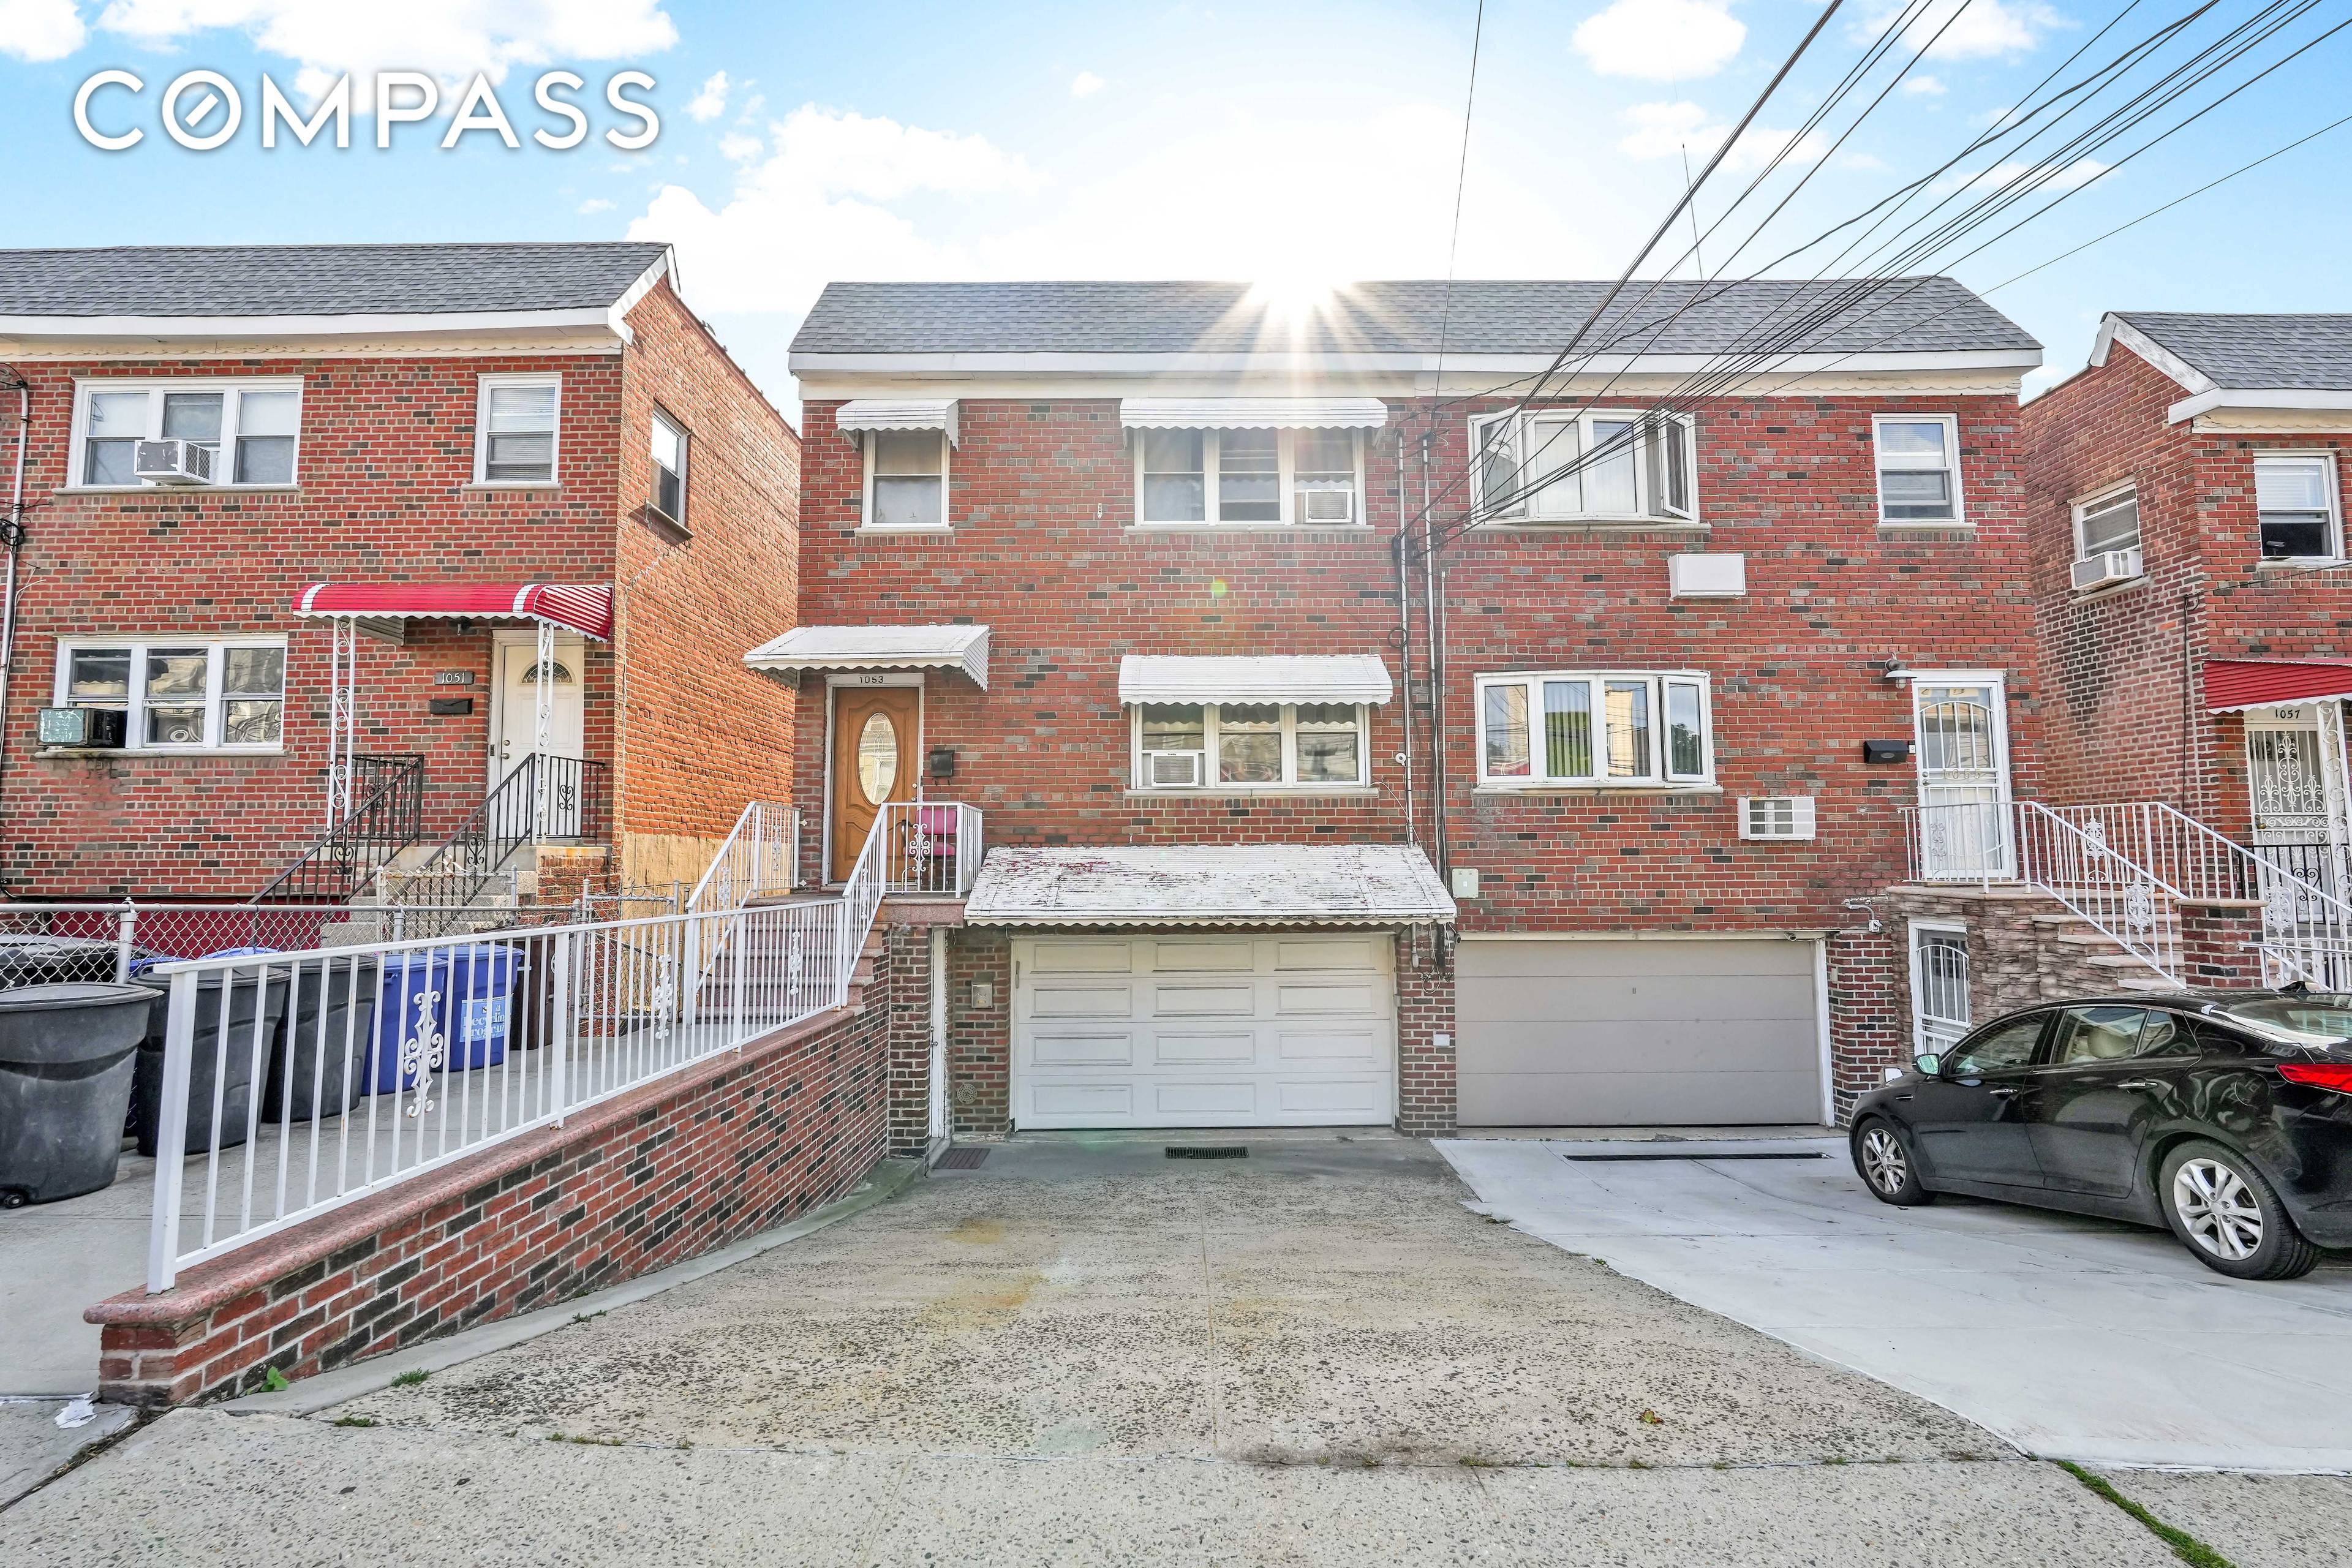 Excellent semi detached three family brick house in a beautiful, secure Bronx neighborhood !